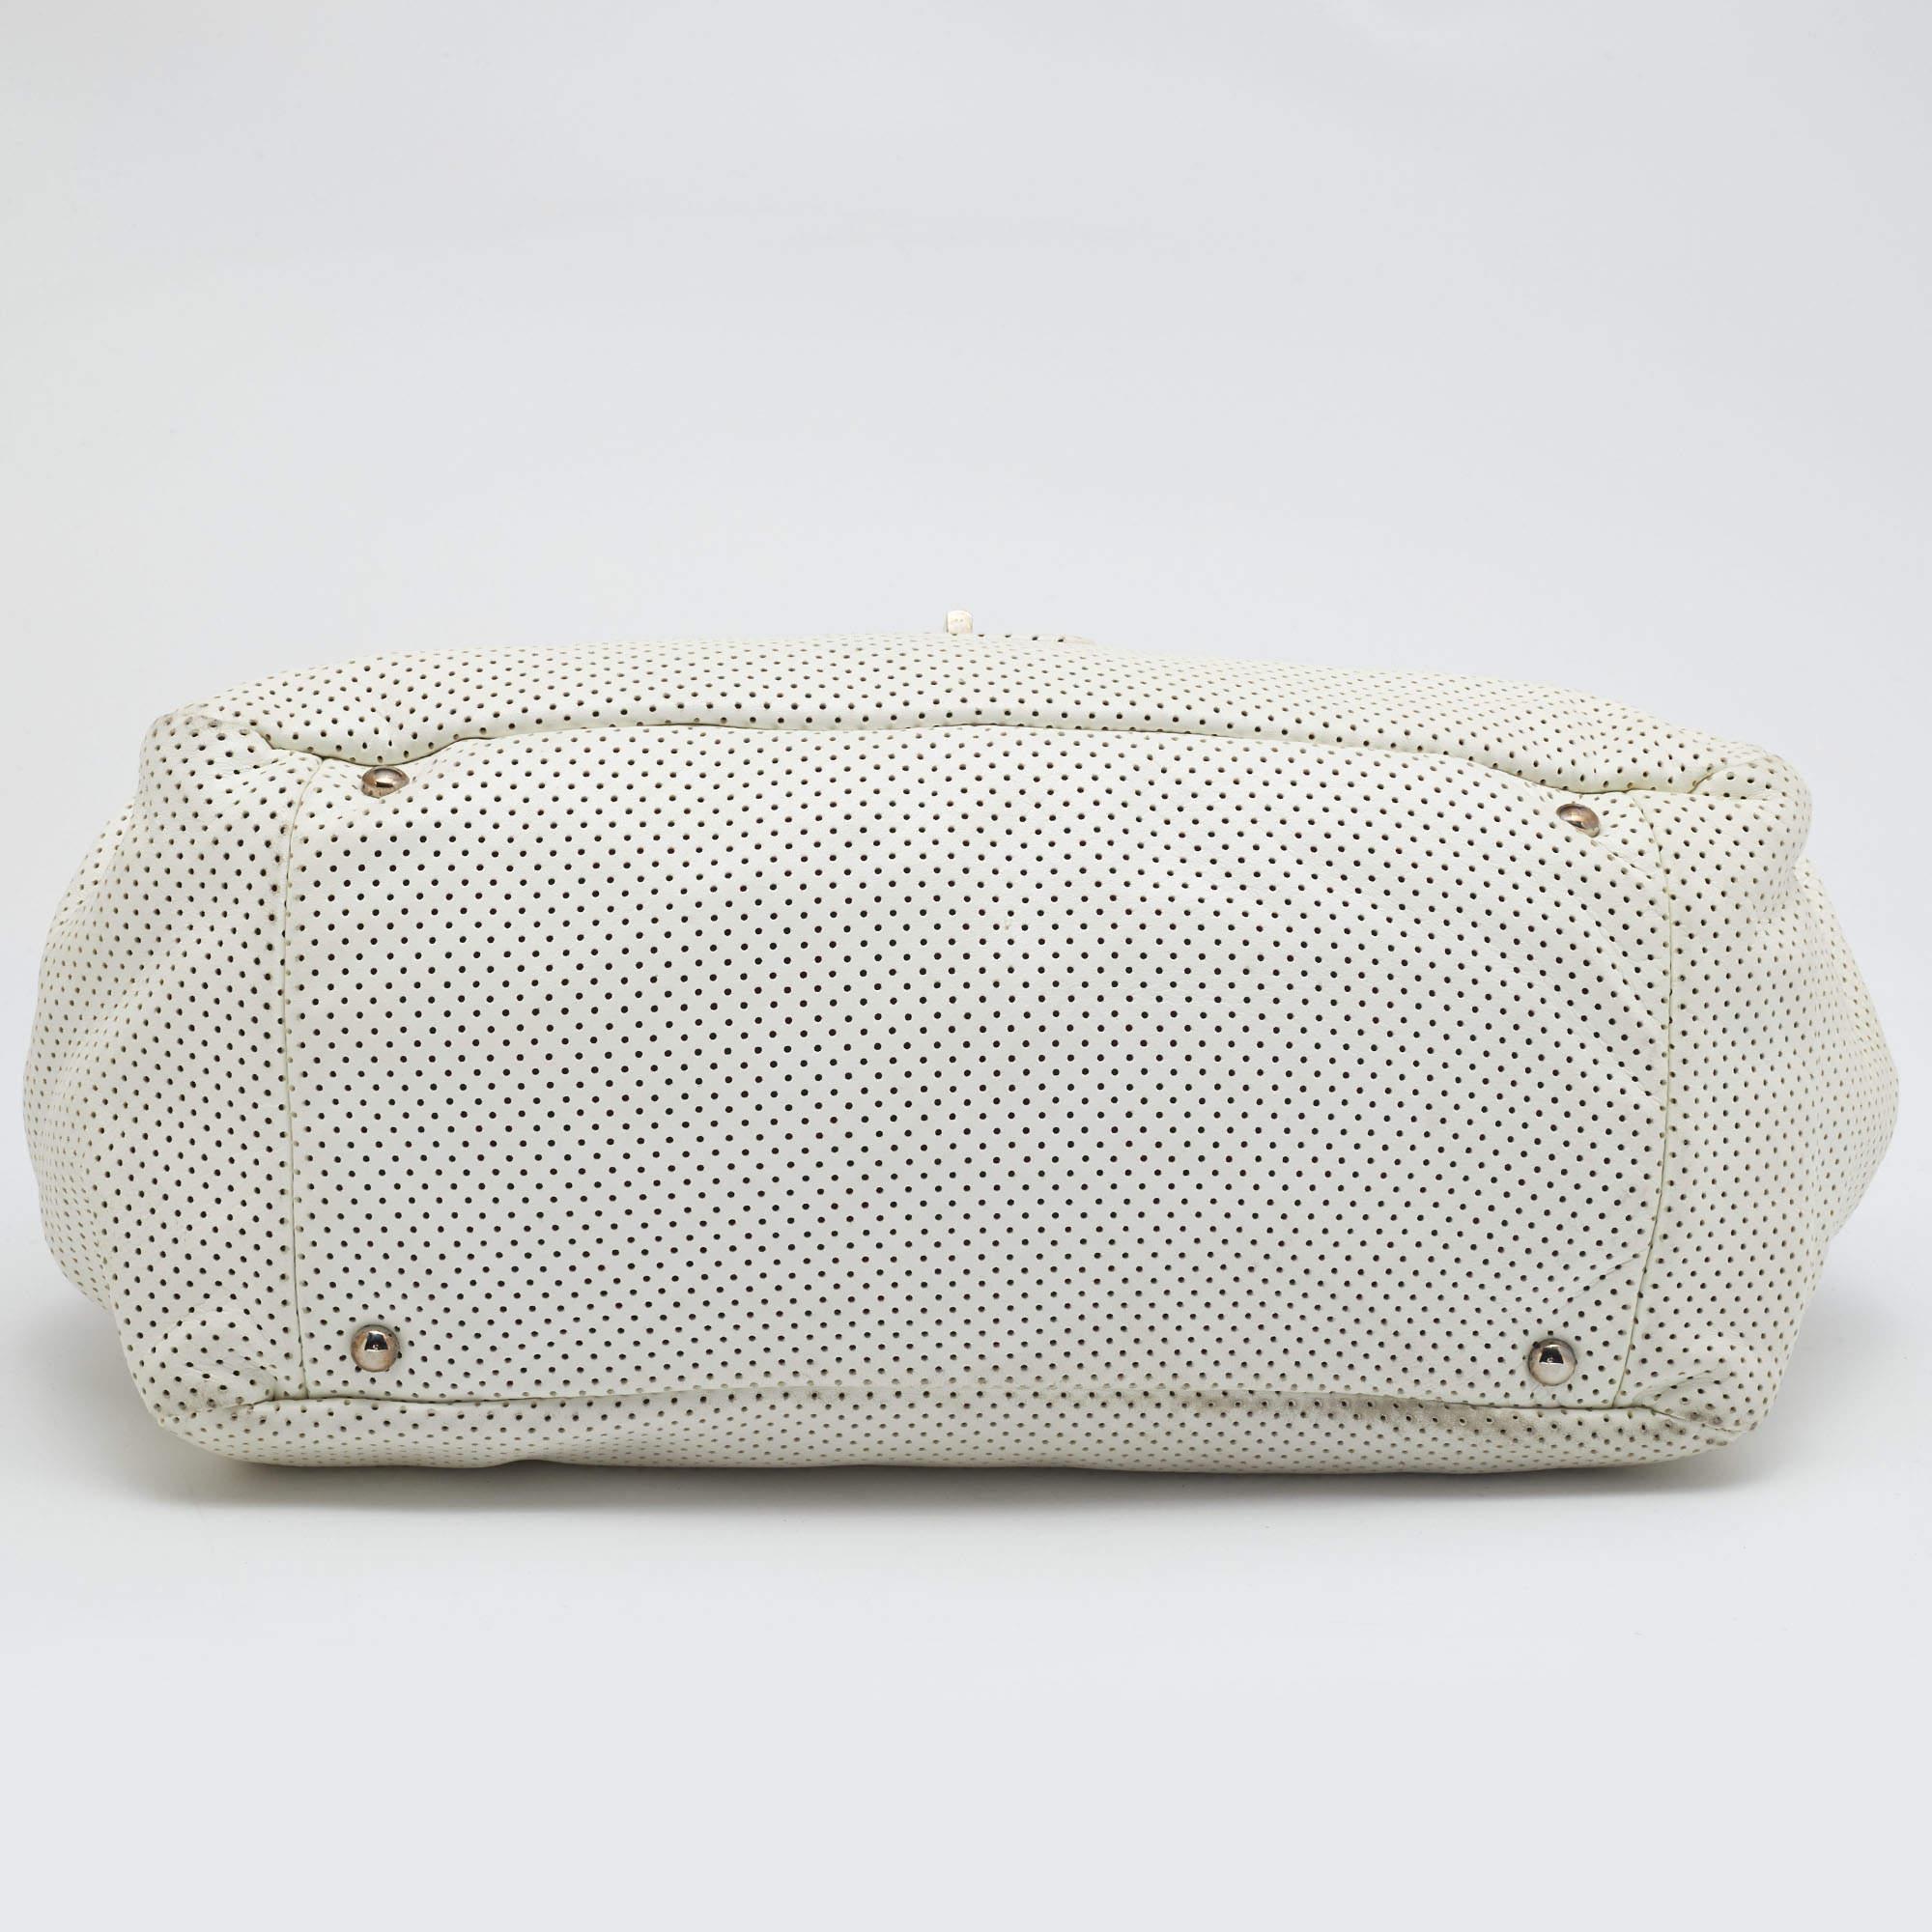 Chanel White Perforated Leather Accordion Flap Bag 1